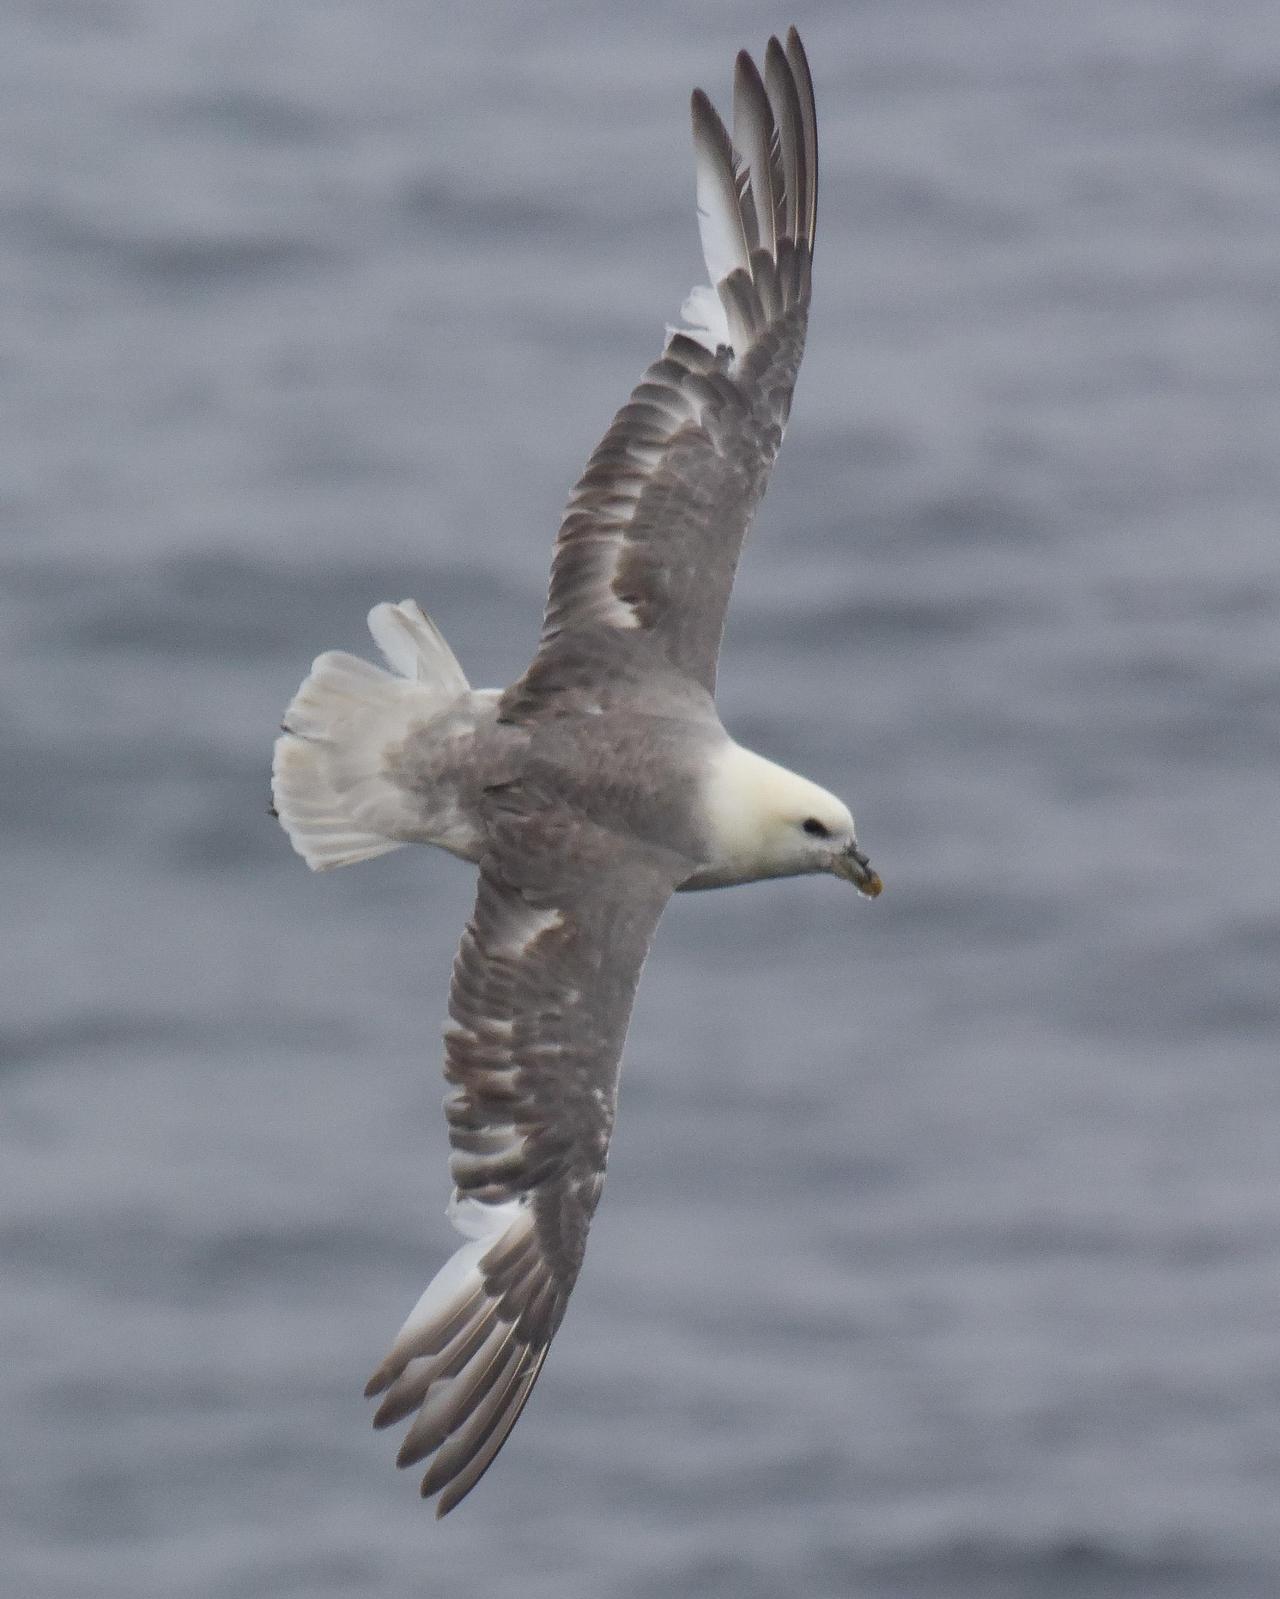 Northern Fulmar Photo by Emily Percival